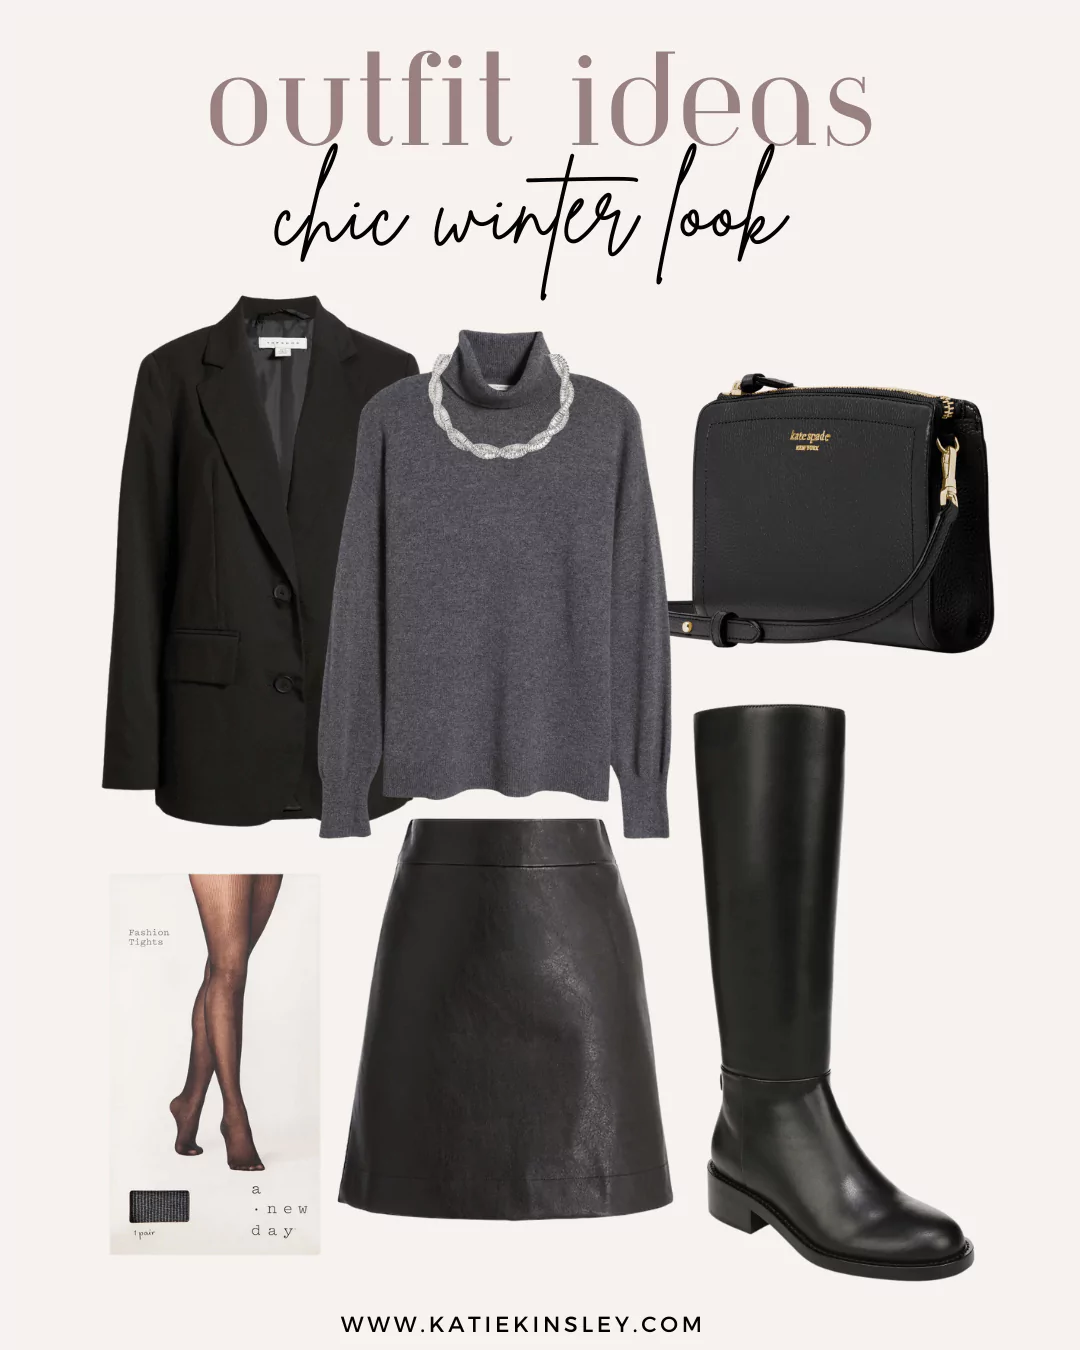 Chic Winter Outfit Idea